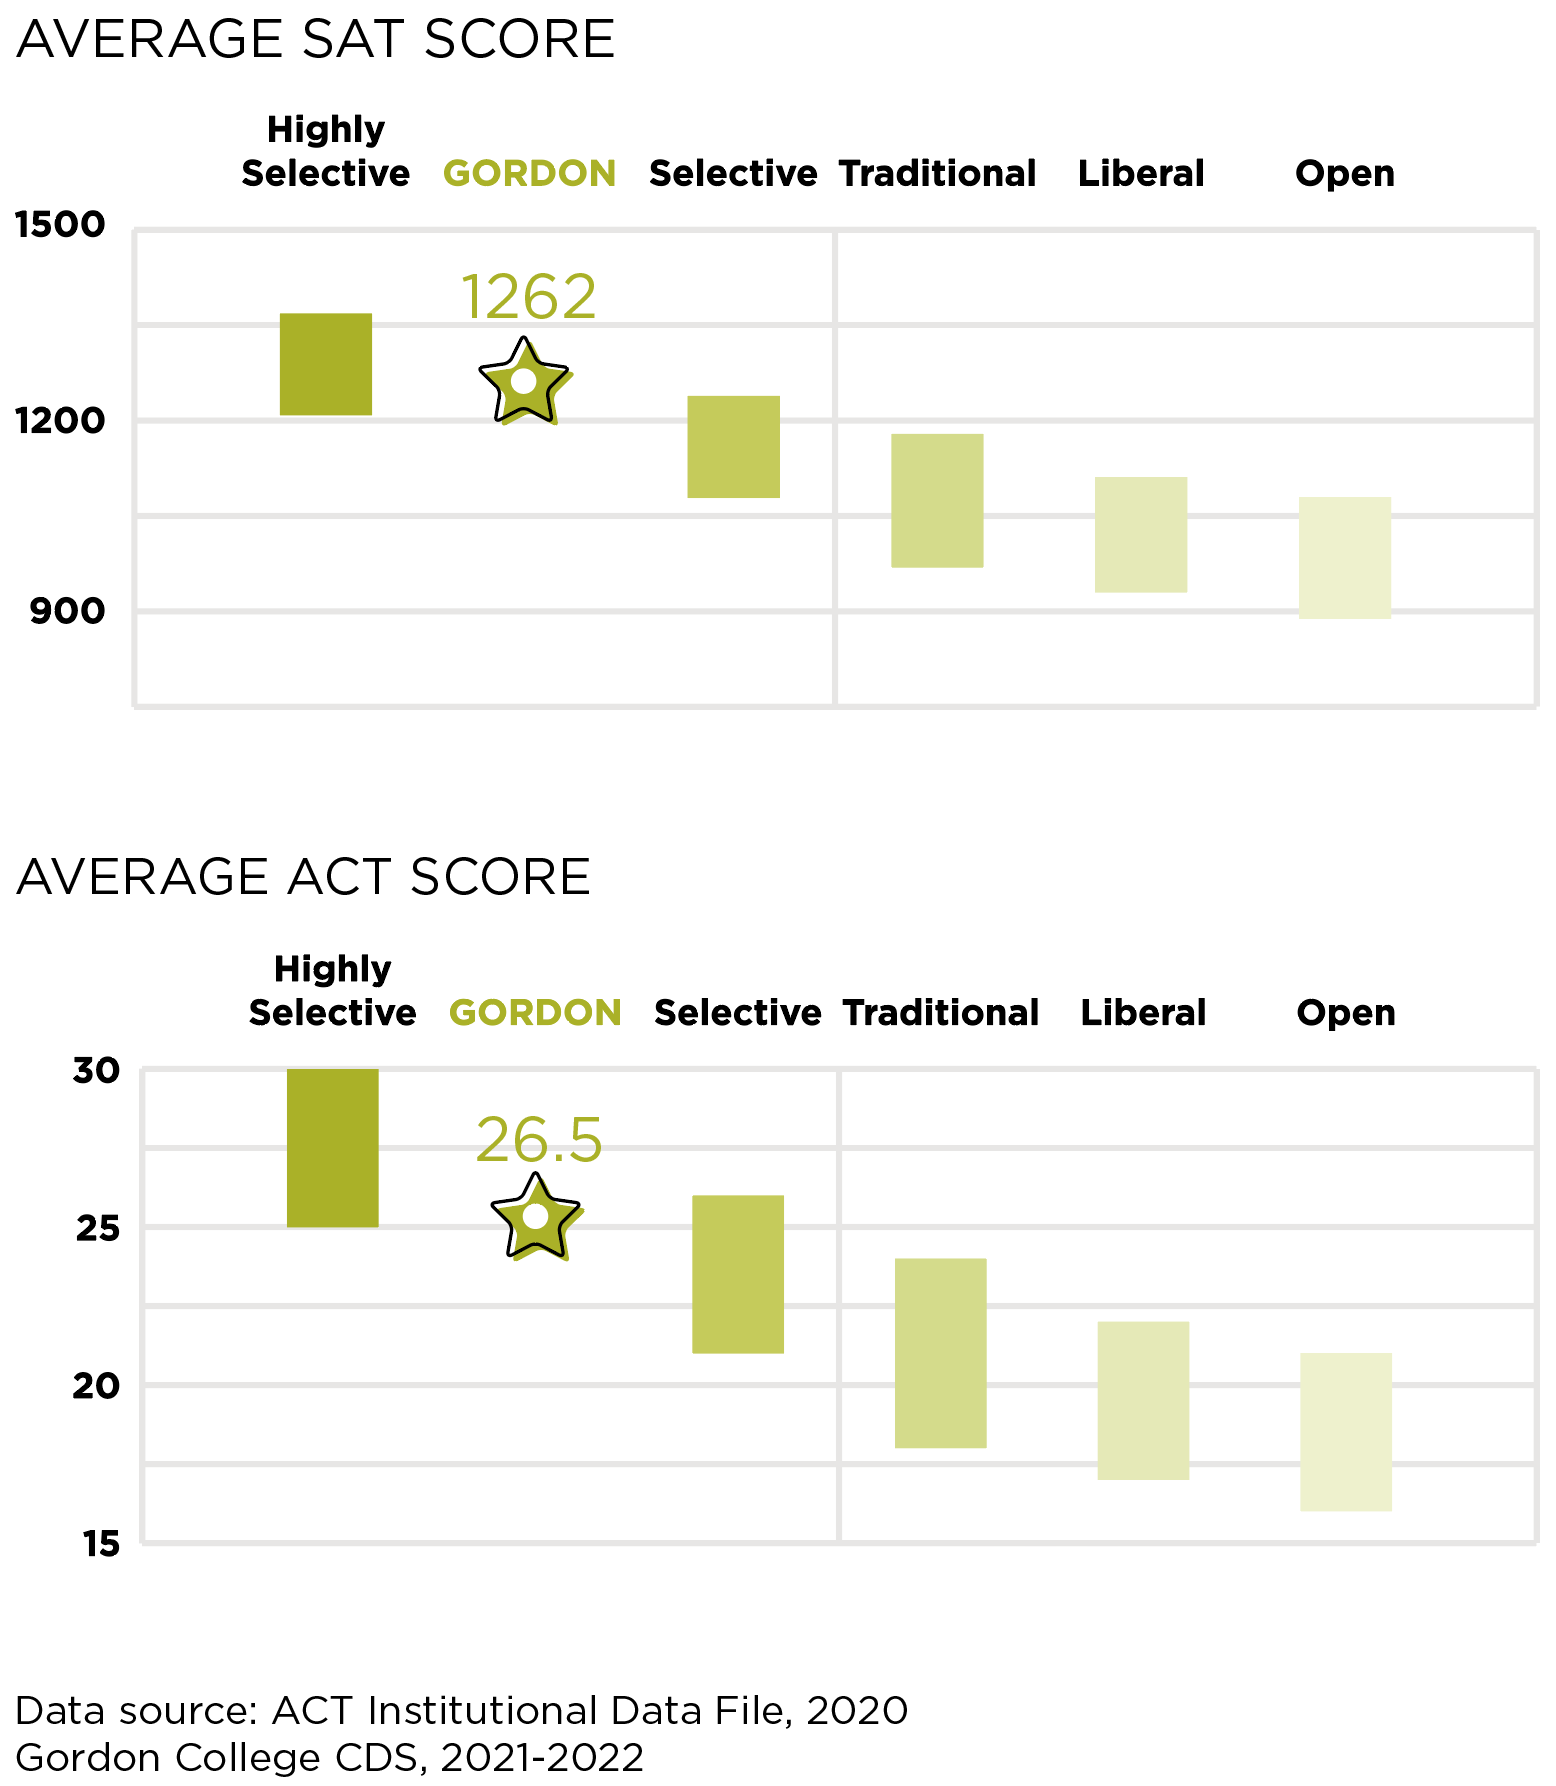 two charts titled “Average SAT score” and “Average ACT Score” showing Gordon College’s average SAT score as 1262 and the average ACT score as 26.5, each of which are considered highly selective in the chart